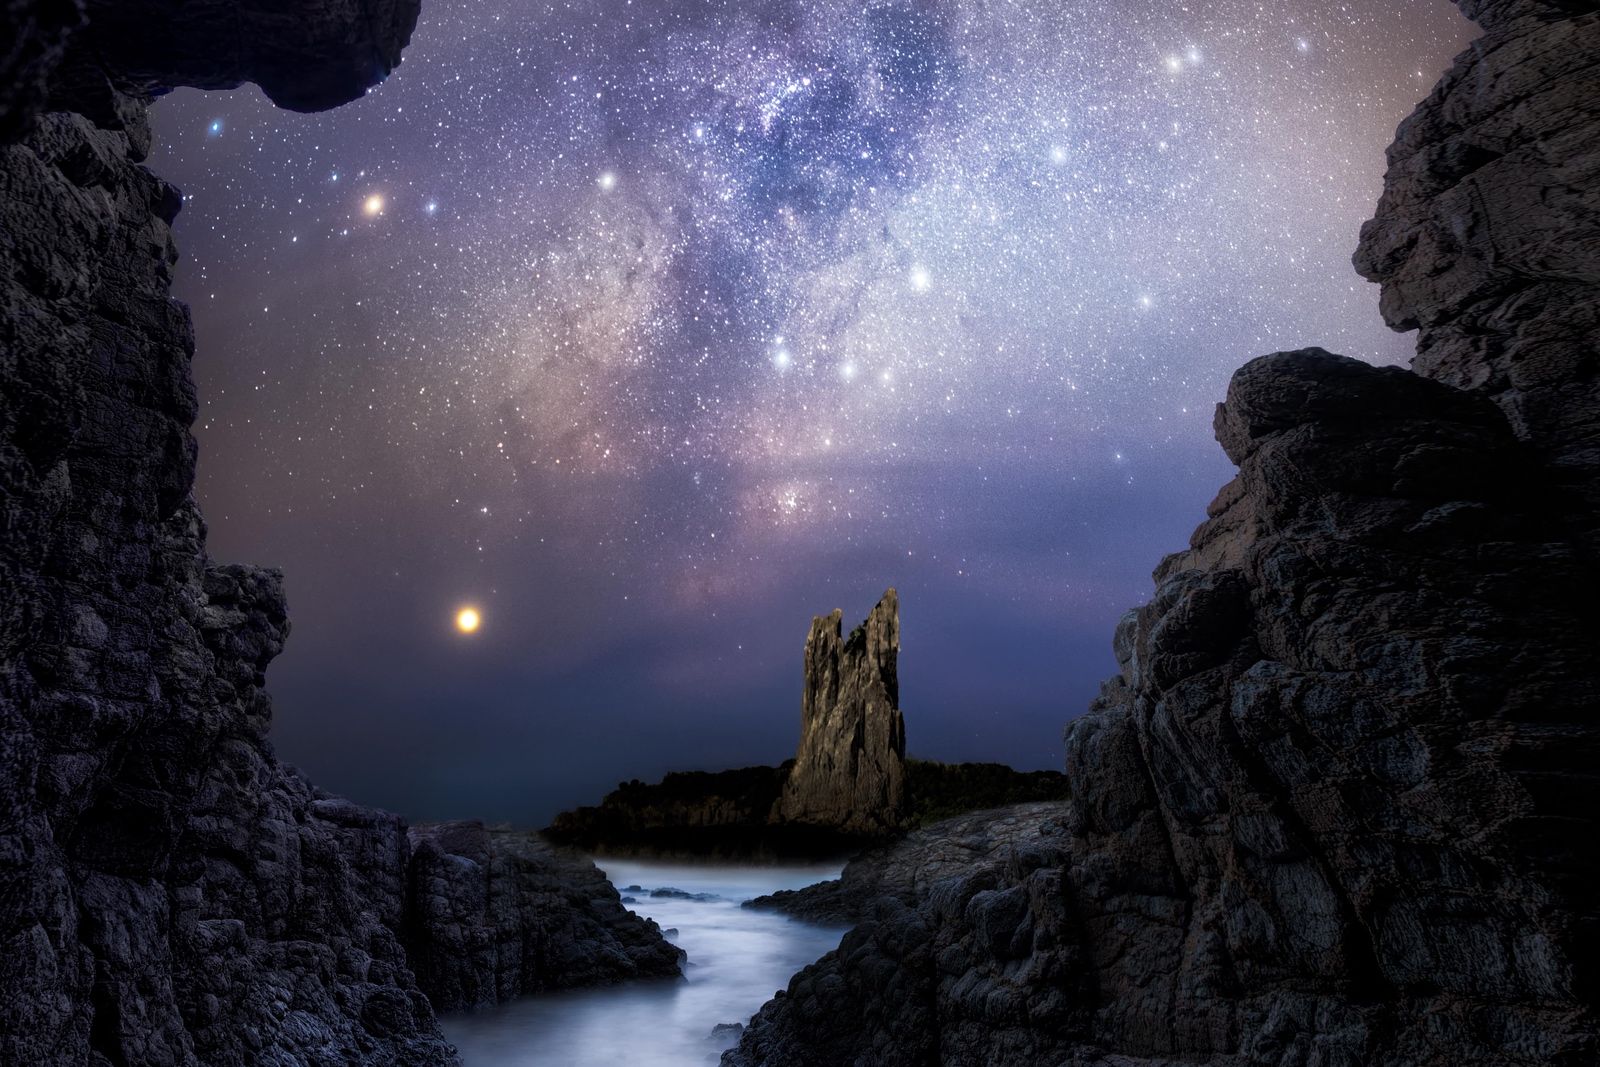 Check out these stunning photos from the 2020 Astronomy Photographer of the Year award photo 9